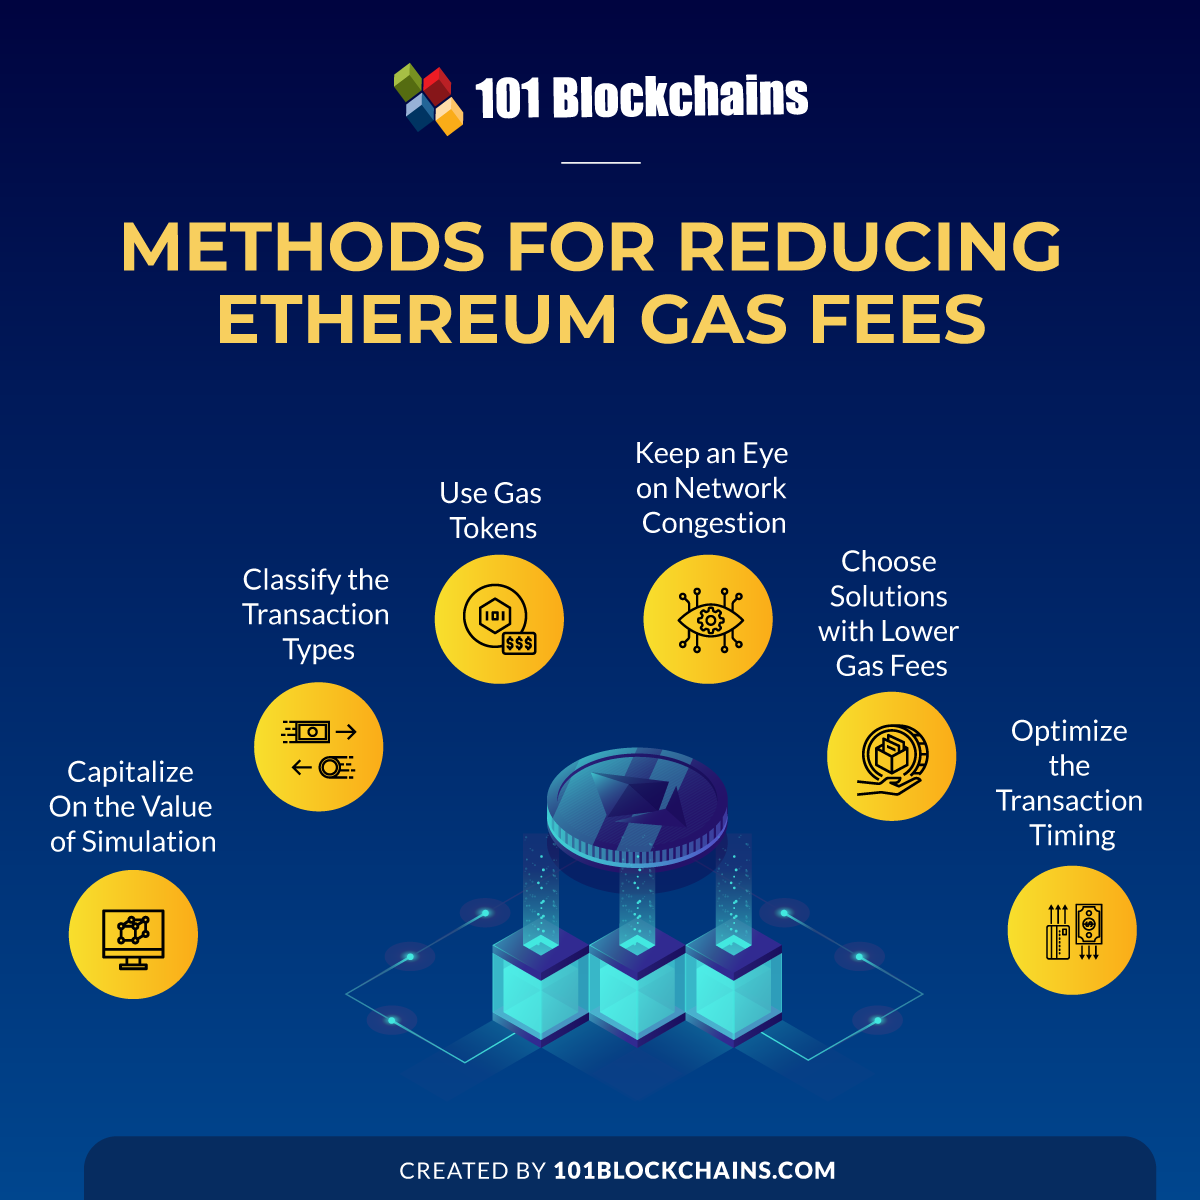 Methods for Reducing Ethereum Gas Fees